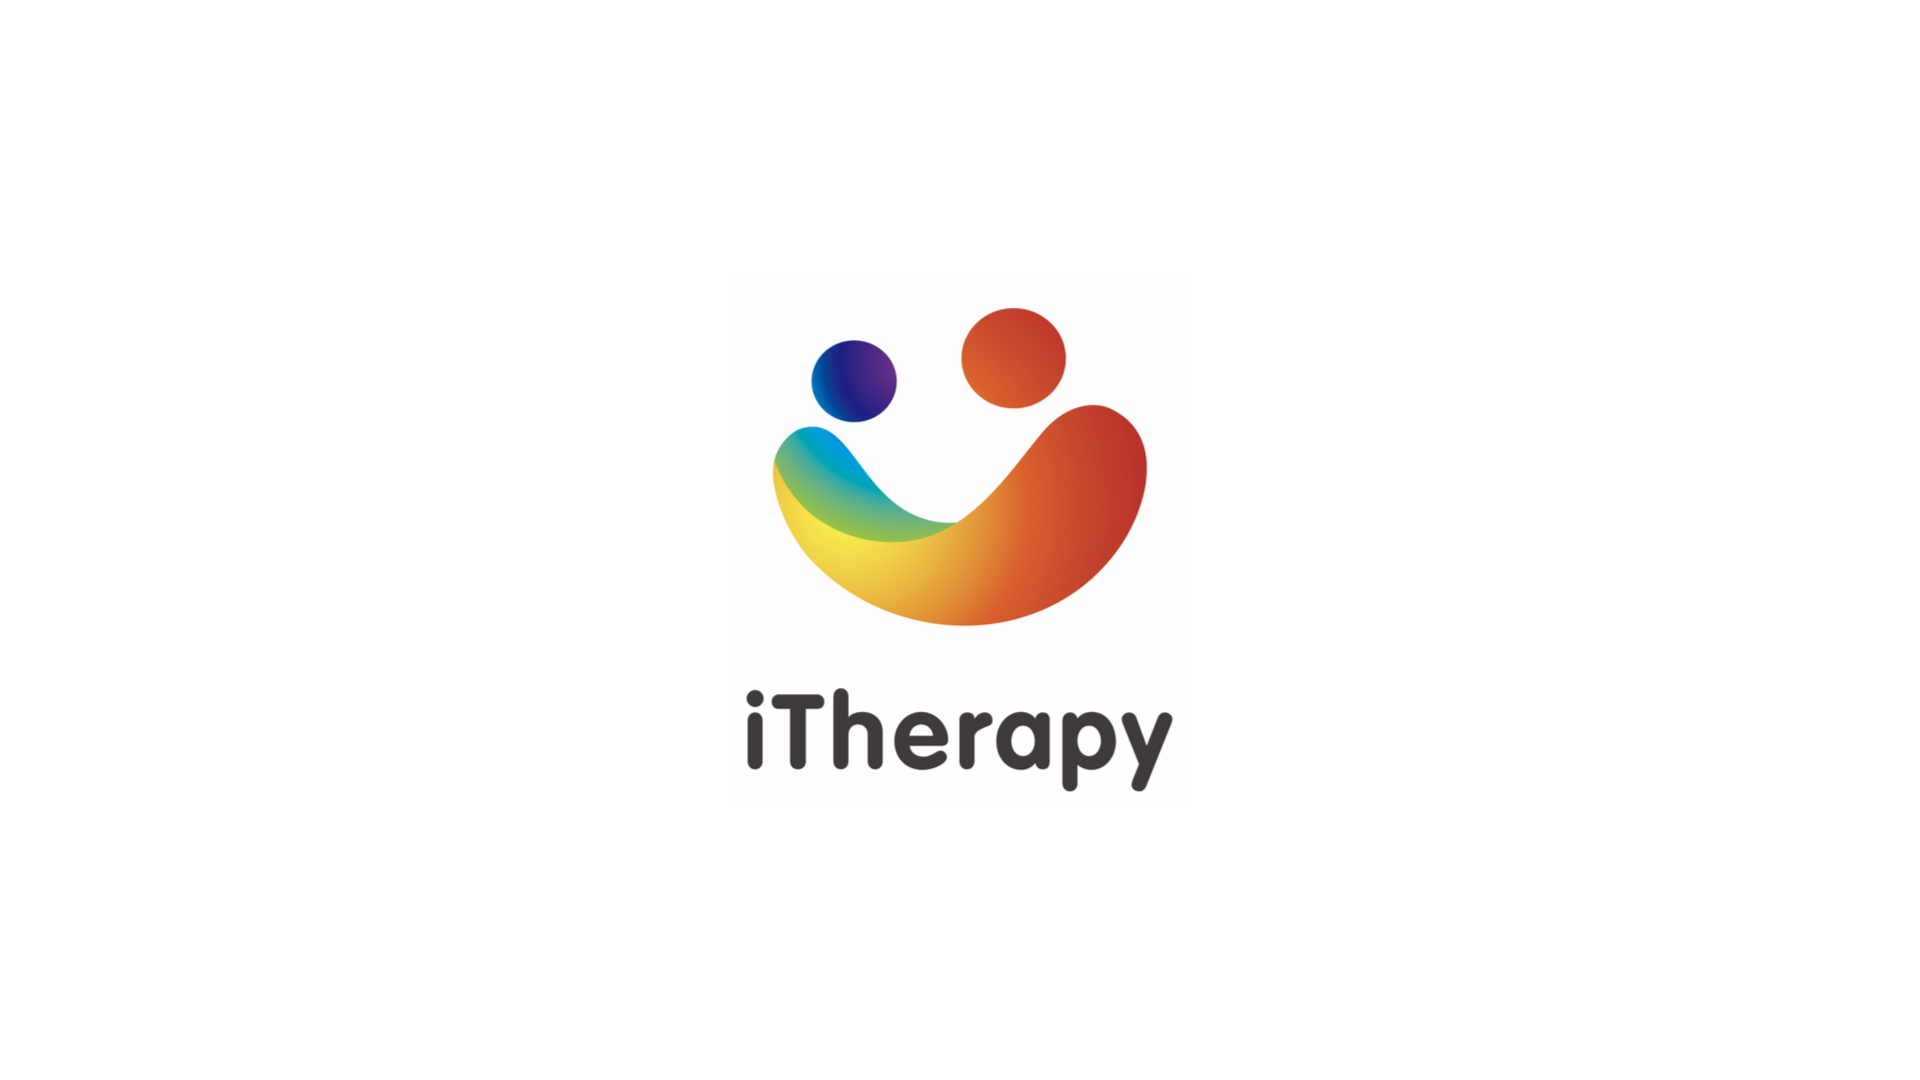 iTherapy